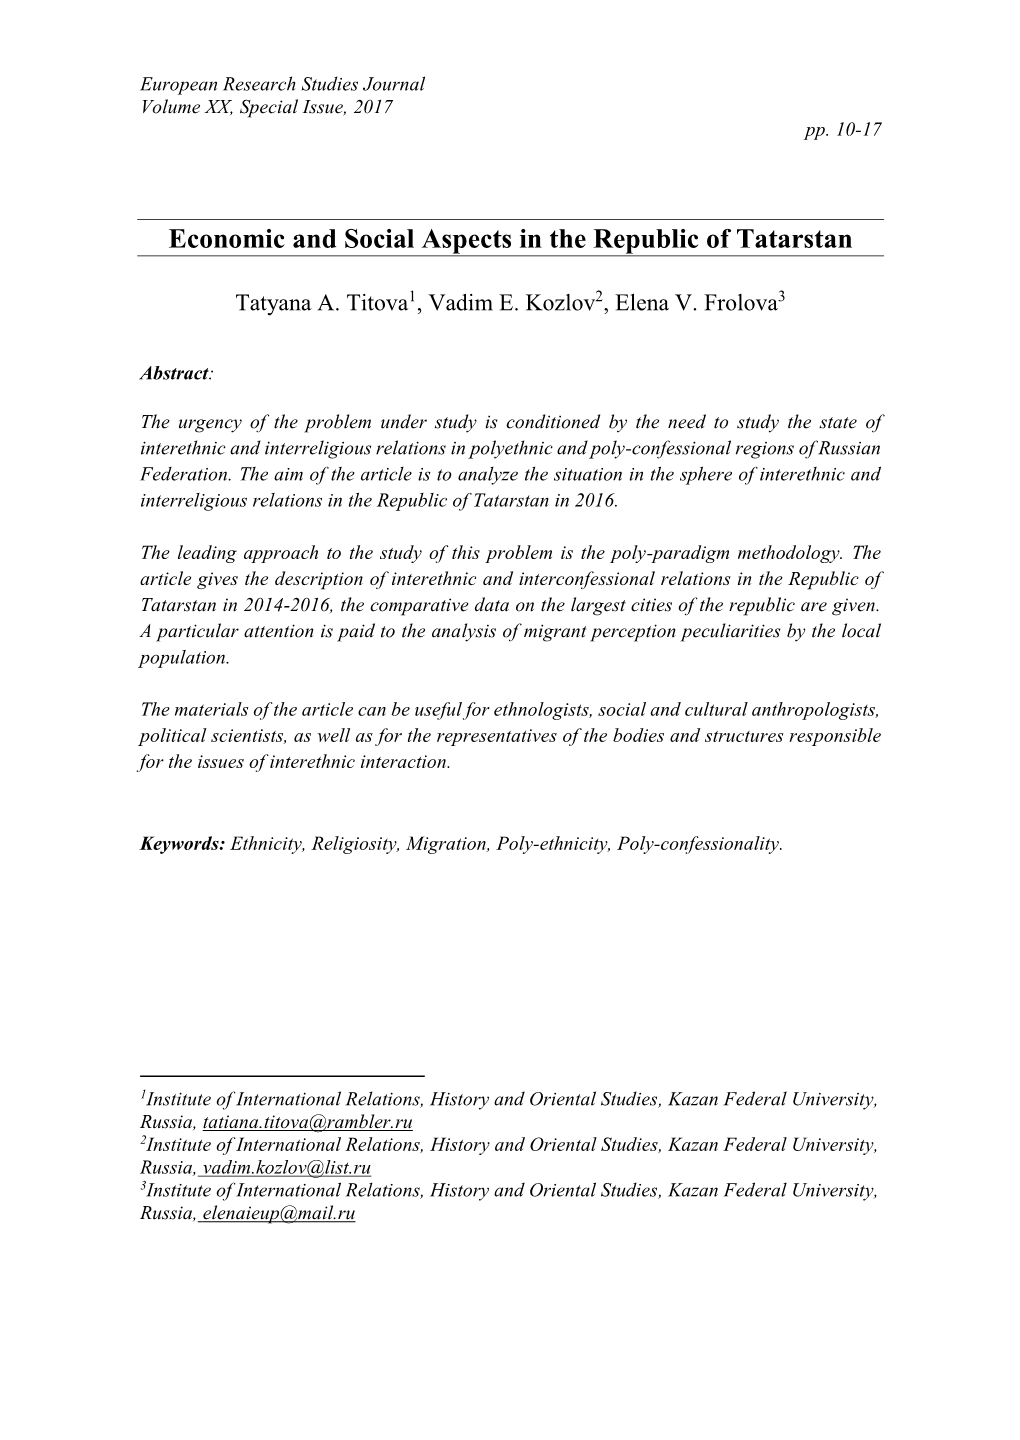 Economic and Social Aspects in the Republic of Tatarstan